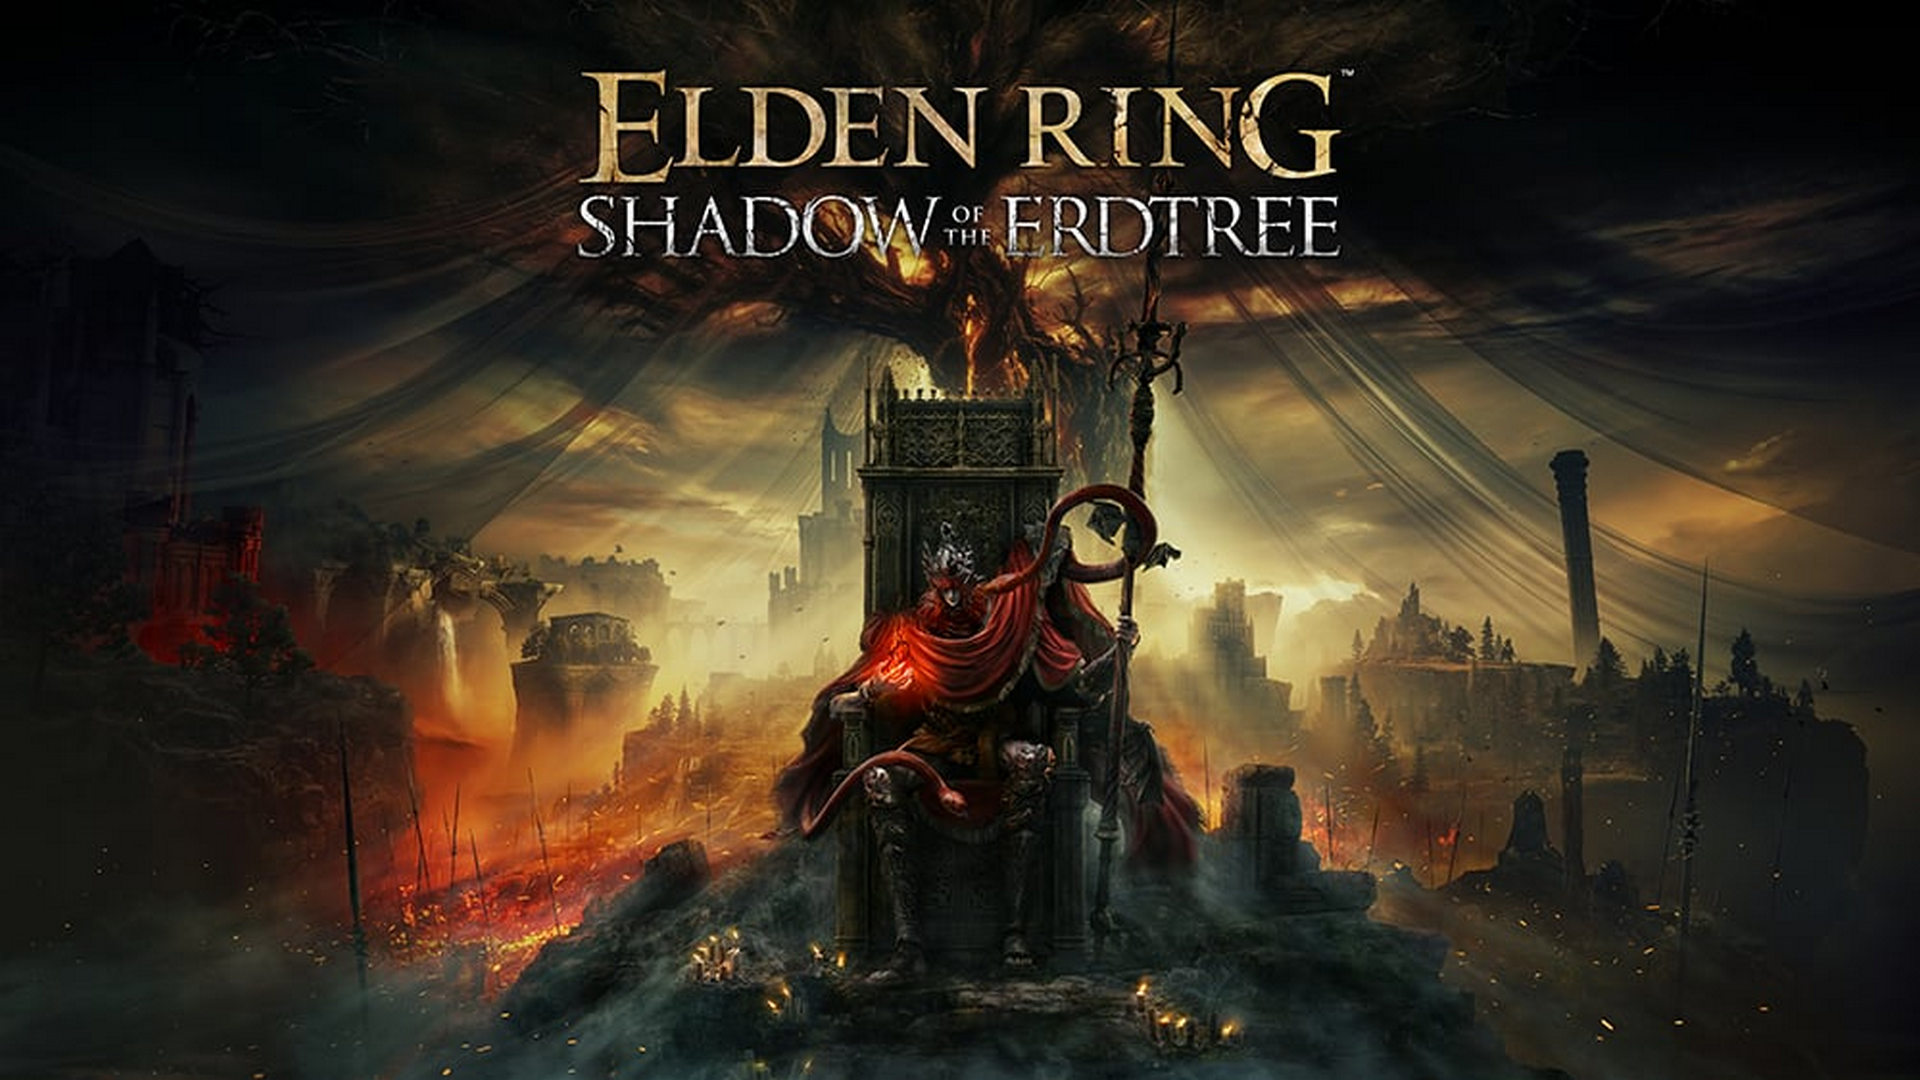 Fall From Grace In Elden Ring Shadow Of The Erdtree – The Expansion To Elden Ring Arriving This June